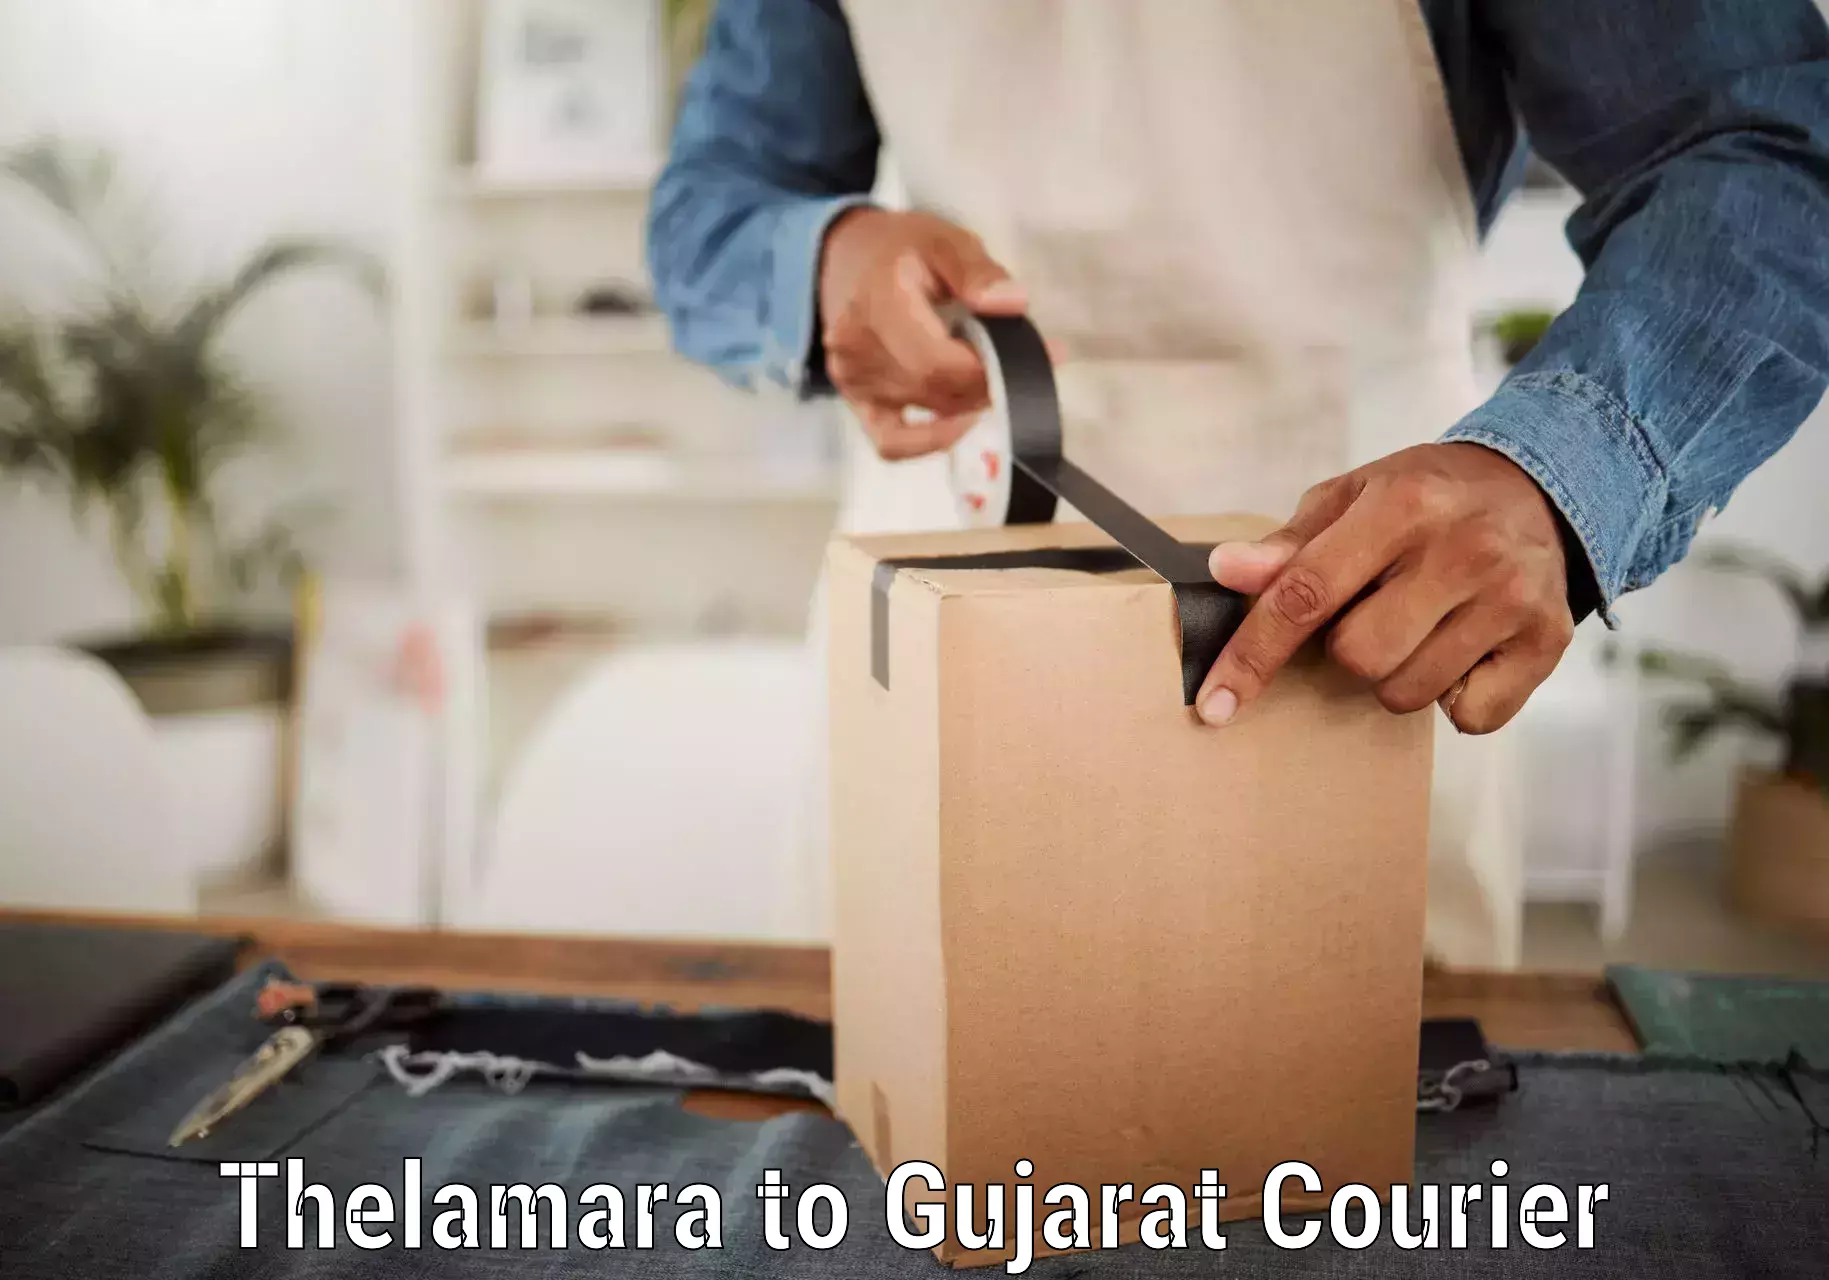 Quick dispatch service Thelamara to Anand